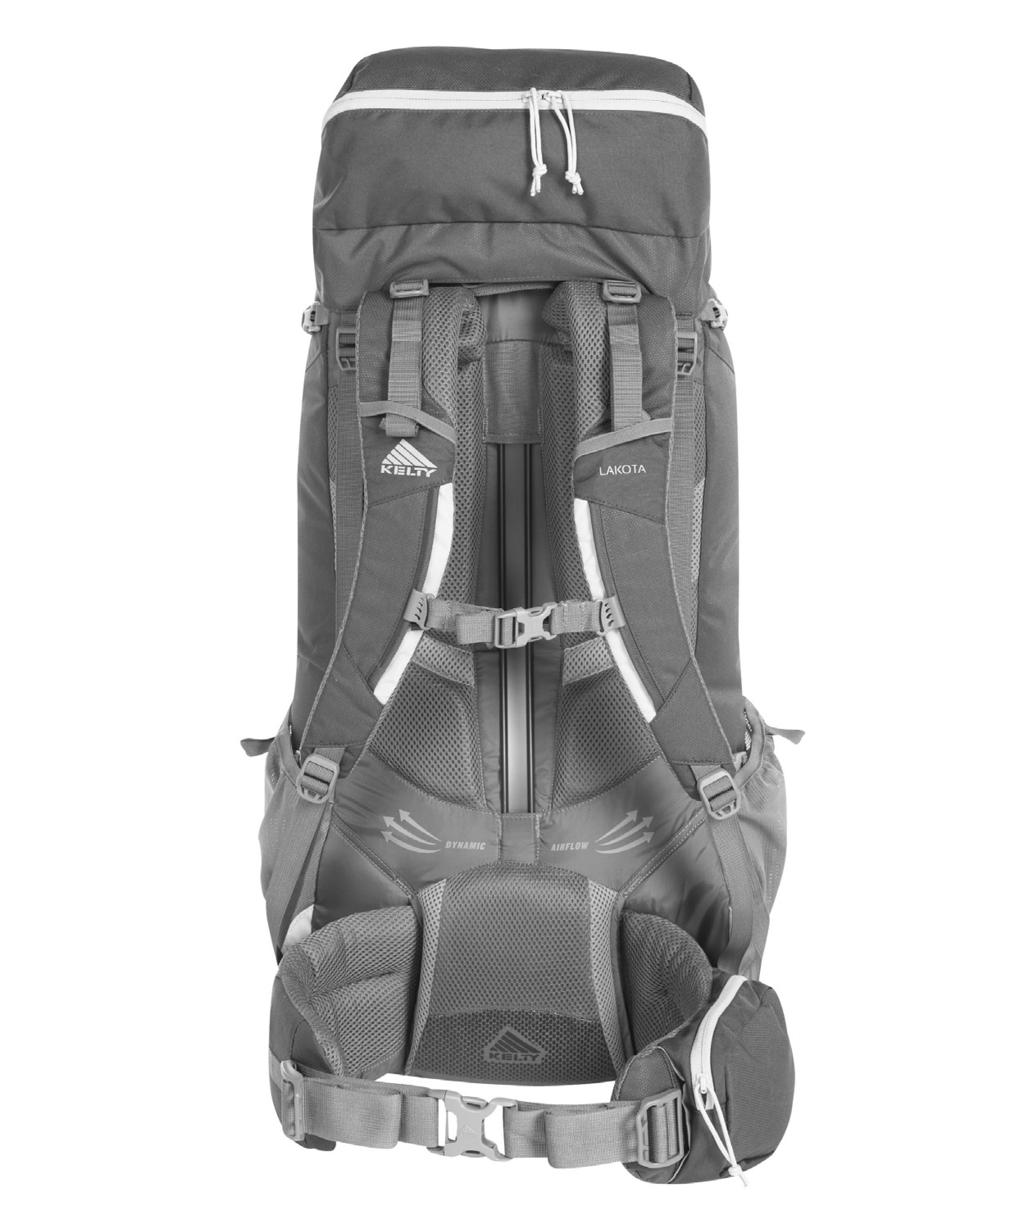 SUSPENSION FEATURES + OVERVIEW Anatomically curved shoulder straps and padded back panel provide a better fit and comfortable load support Packs are available in multiple torso sizes to fit a wide